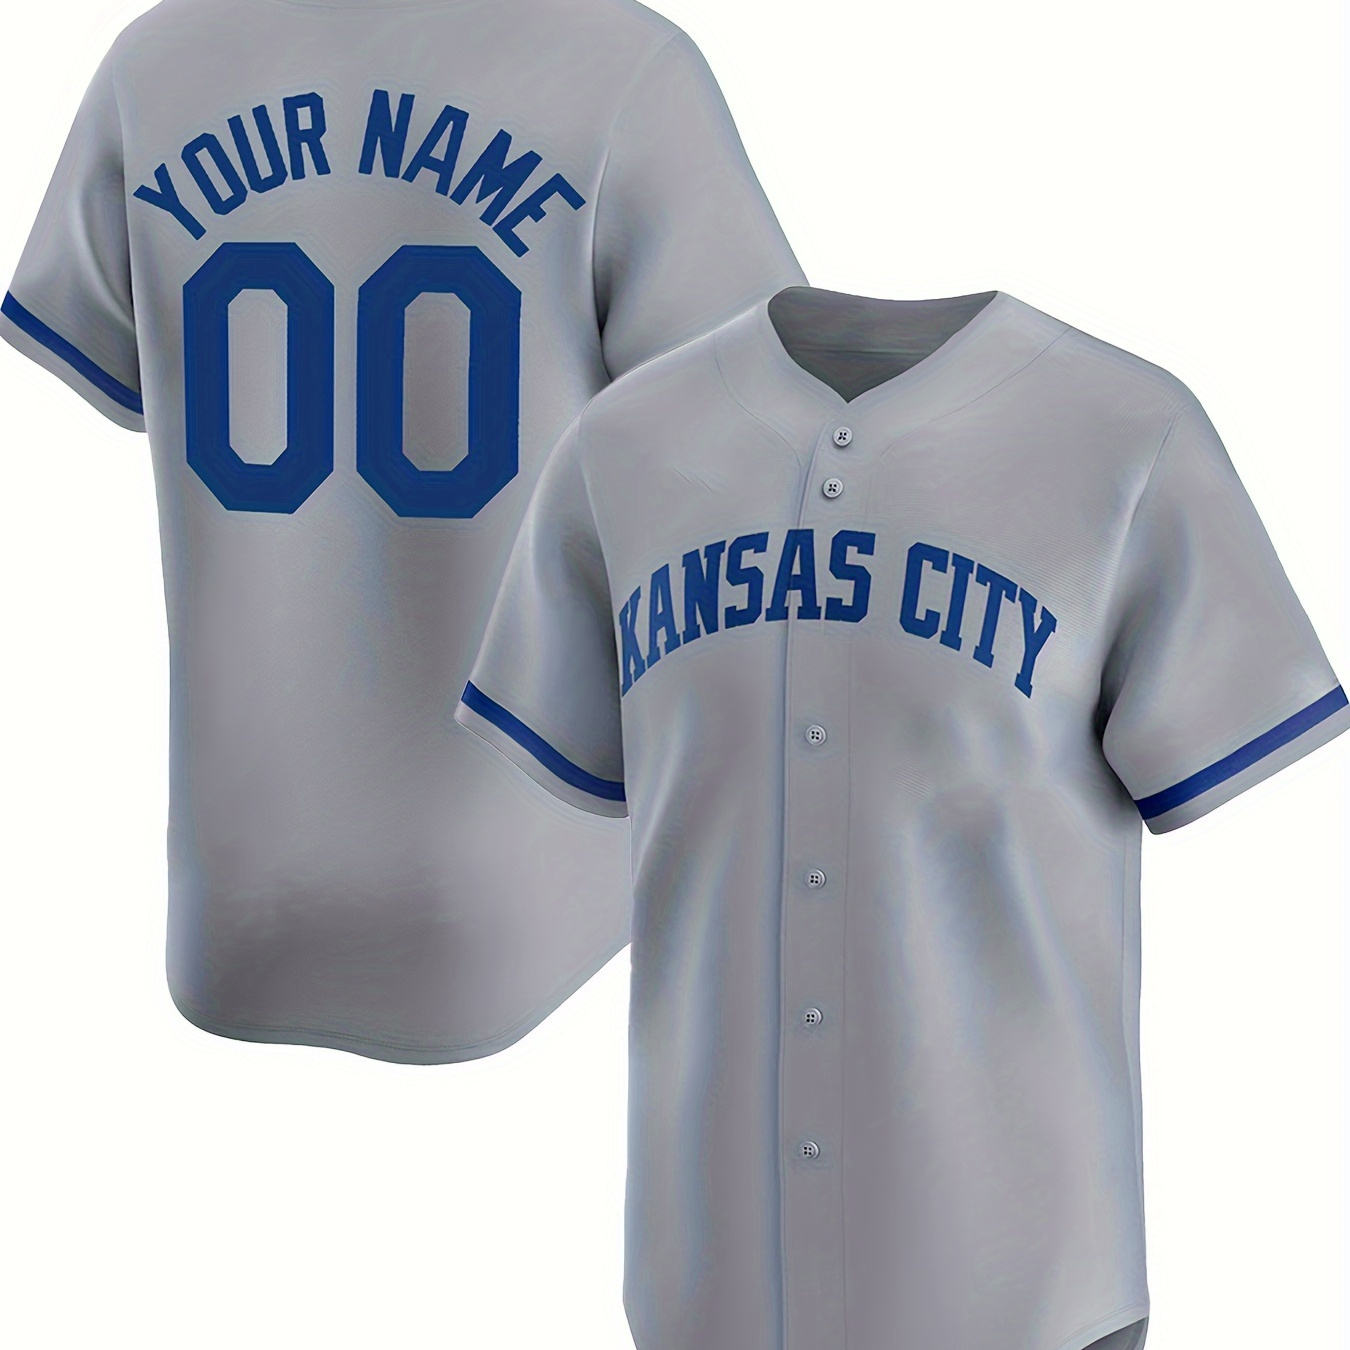 

Customized Men's Baseball Jersey, Leisure Sports Style, Personalized Name And Number, Athletic Team Uniform